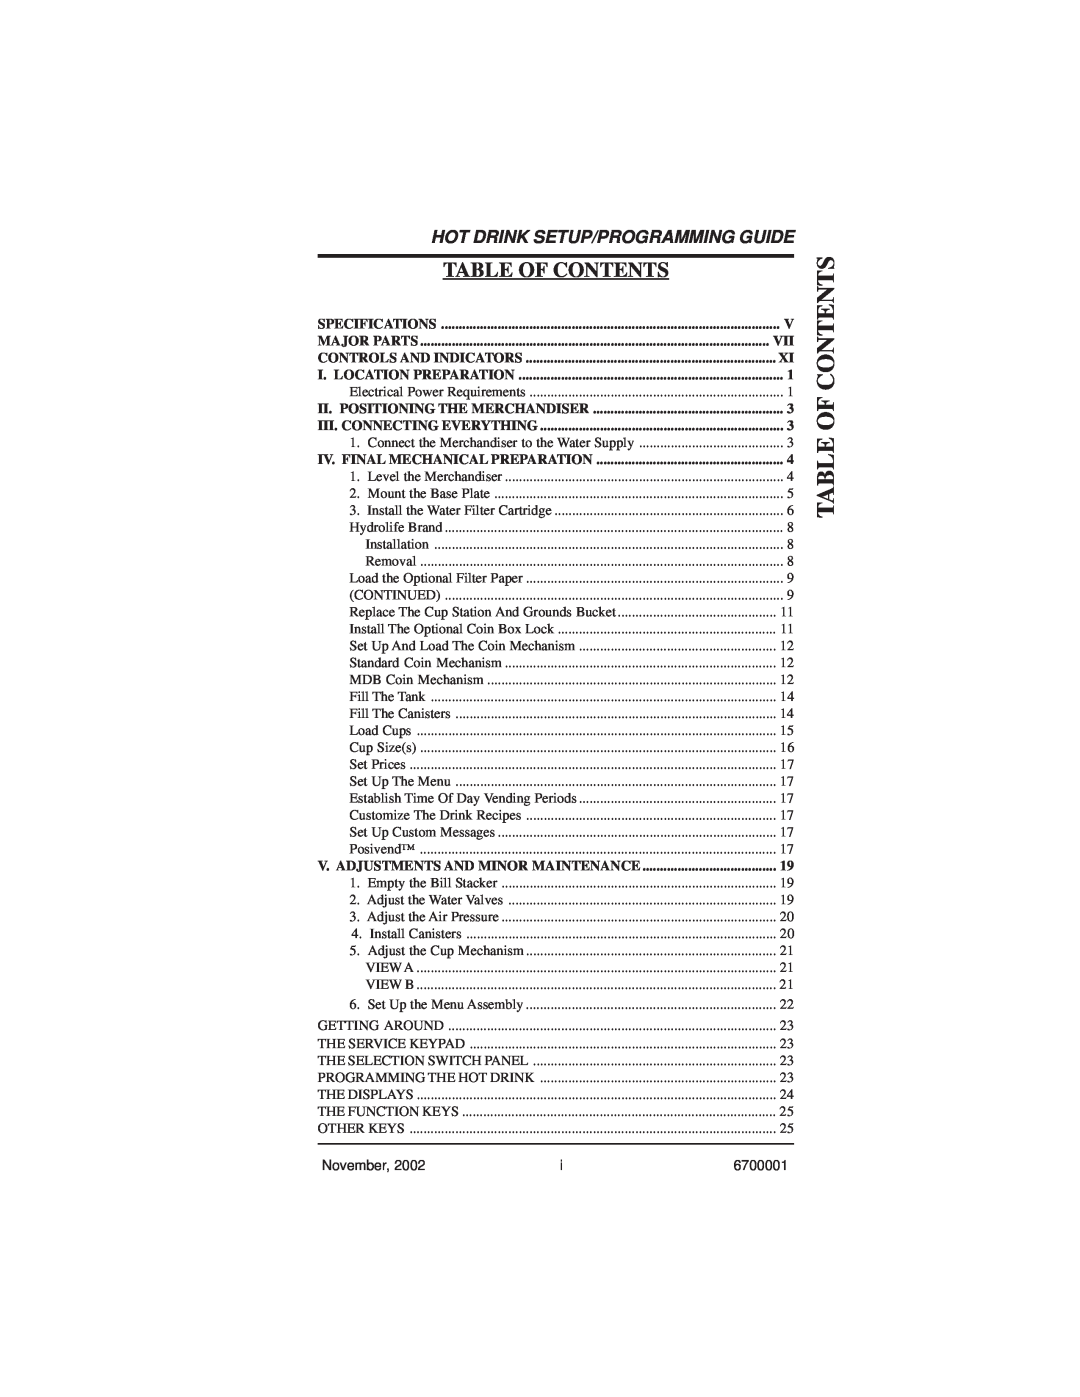 Crane Merchandising Systems 678 Table Of Contents, Hot Drink Setup/Programming Guide, Table Contentsof, Specifications 